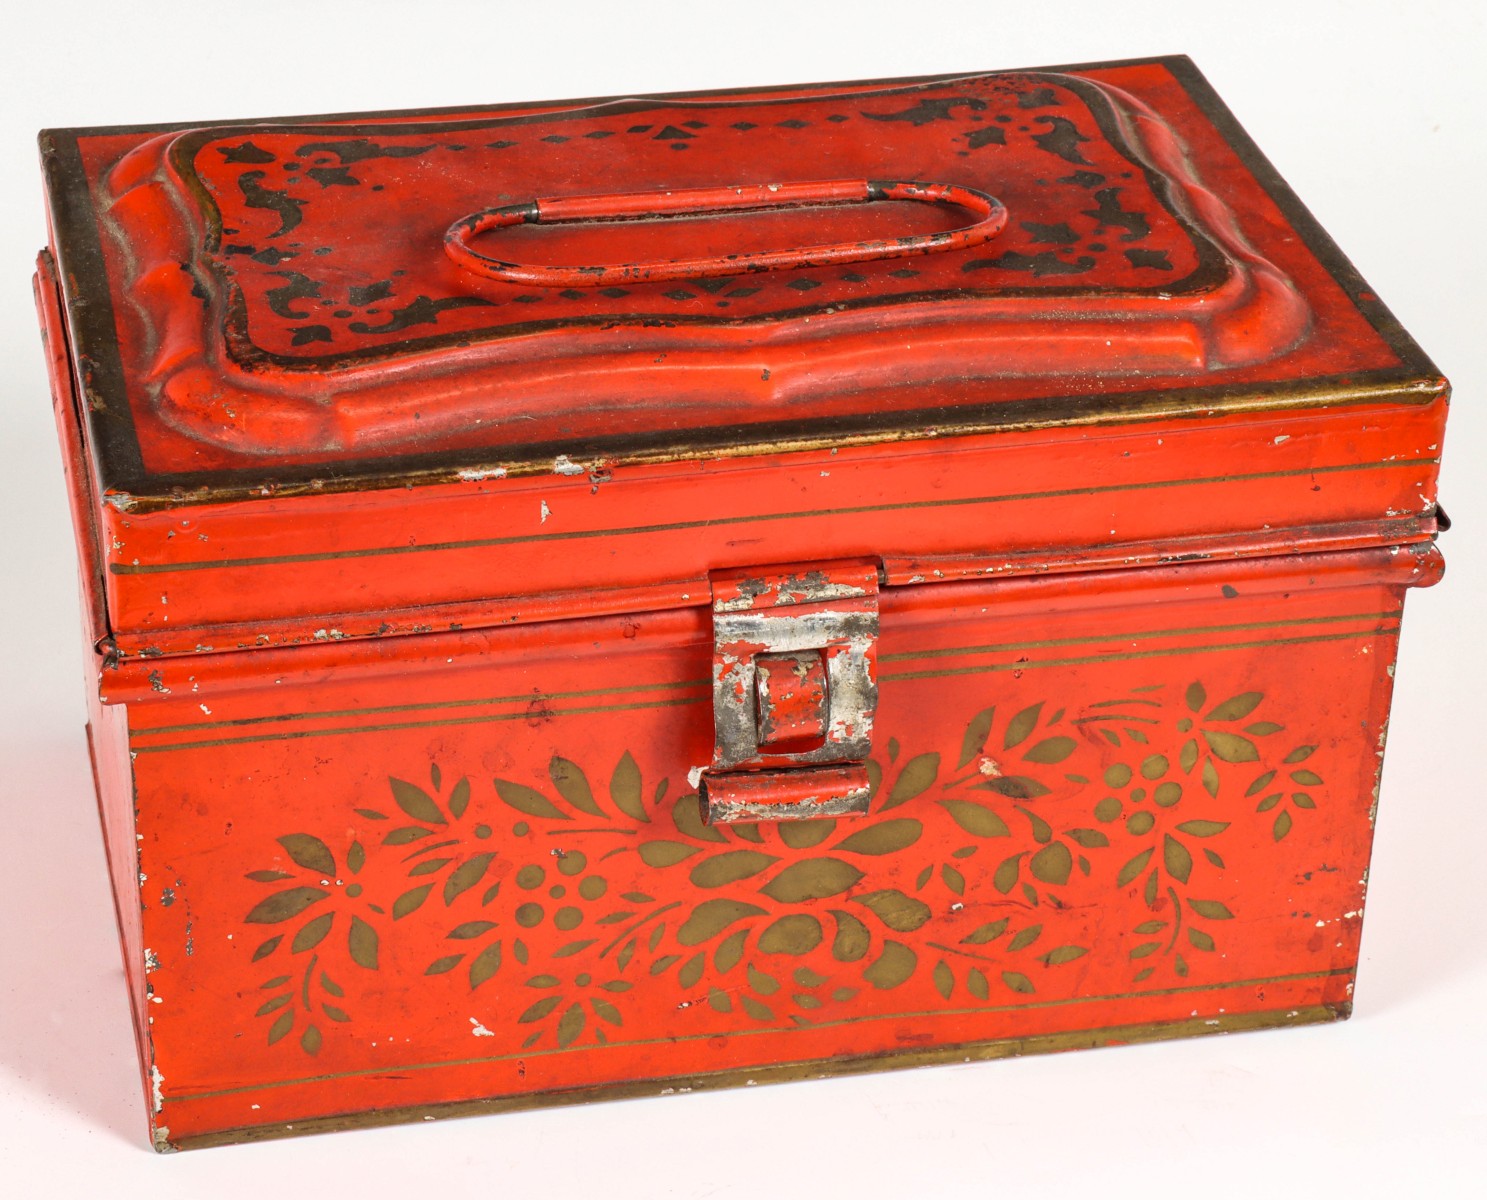 A SALMON TOLE DOCUMENT BOX WITH GOLD STENCILING